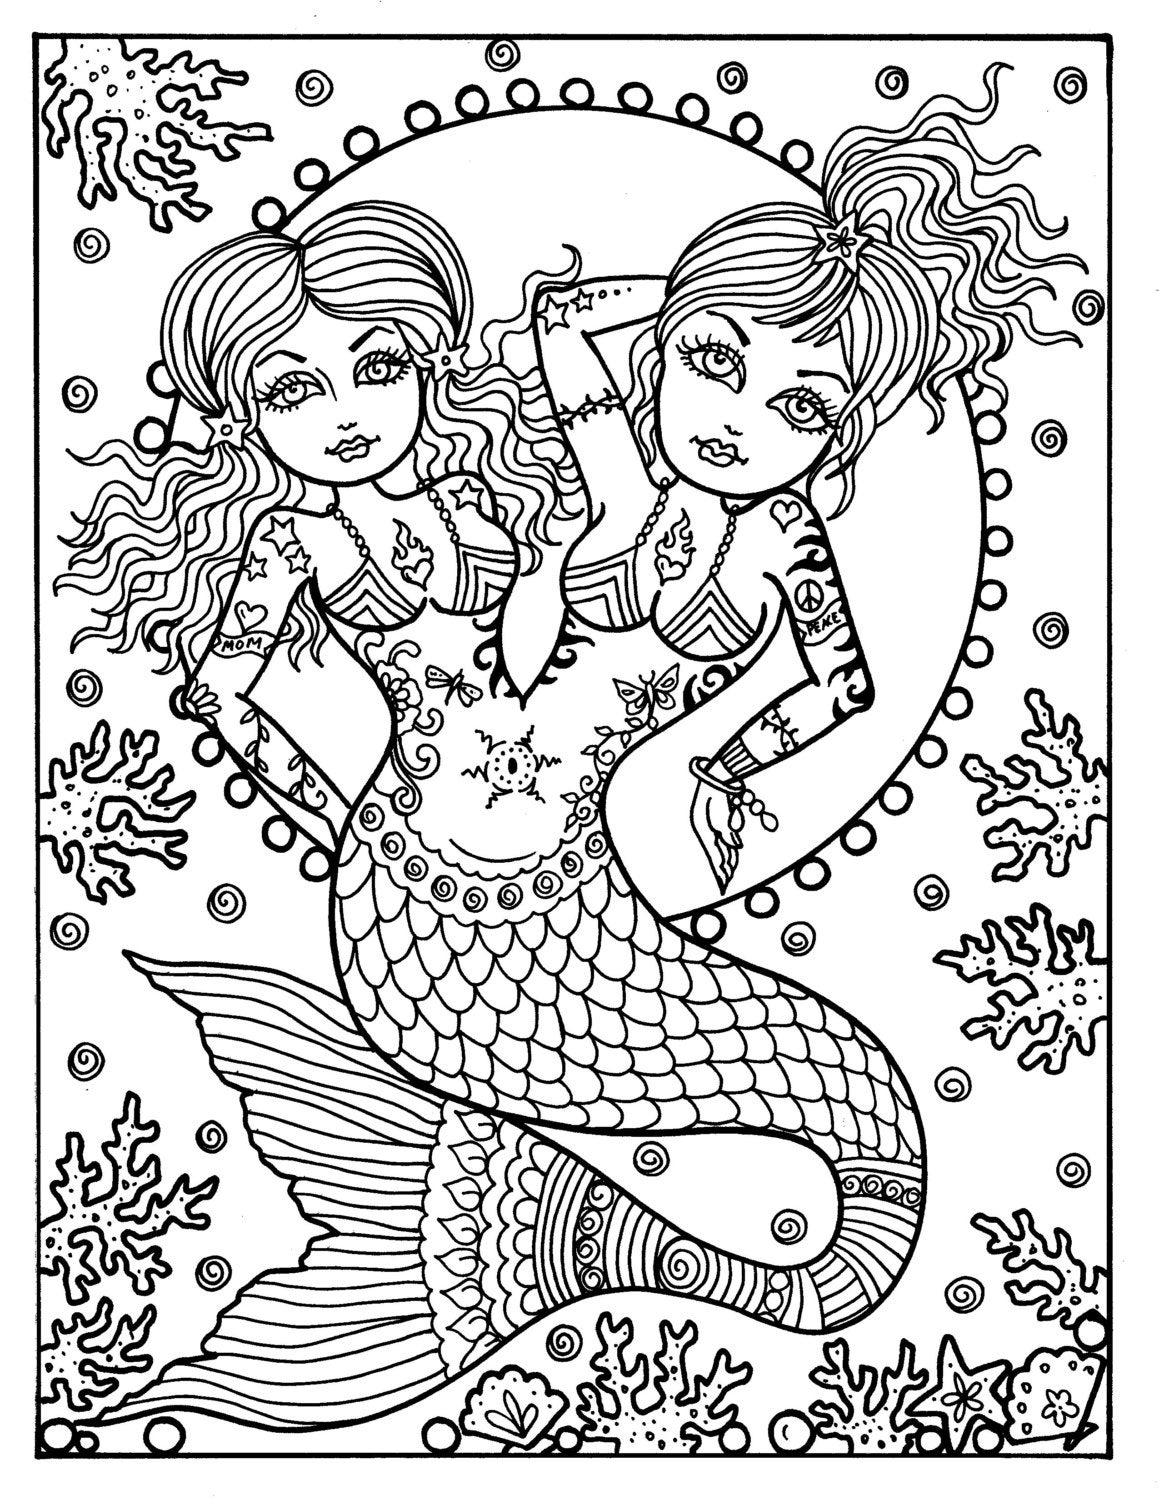 Download Instant download mermaids Coloring page Adult Coloring Books